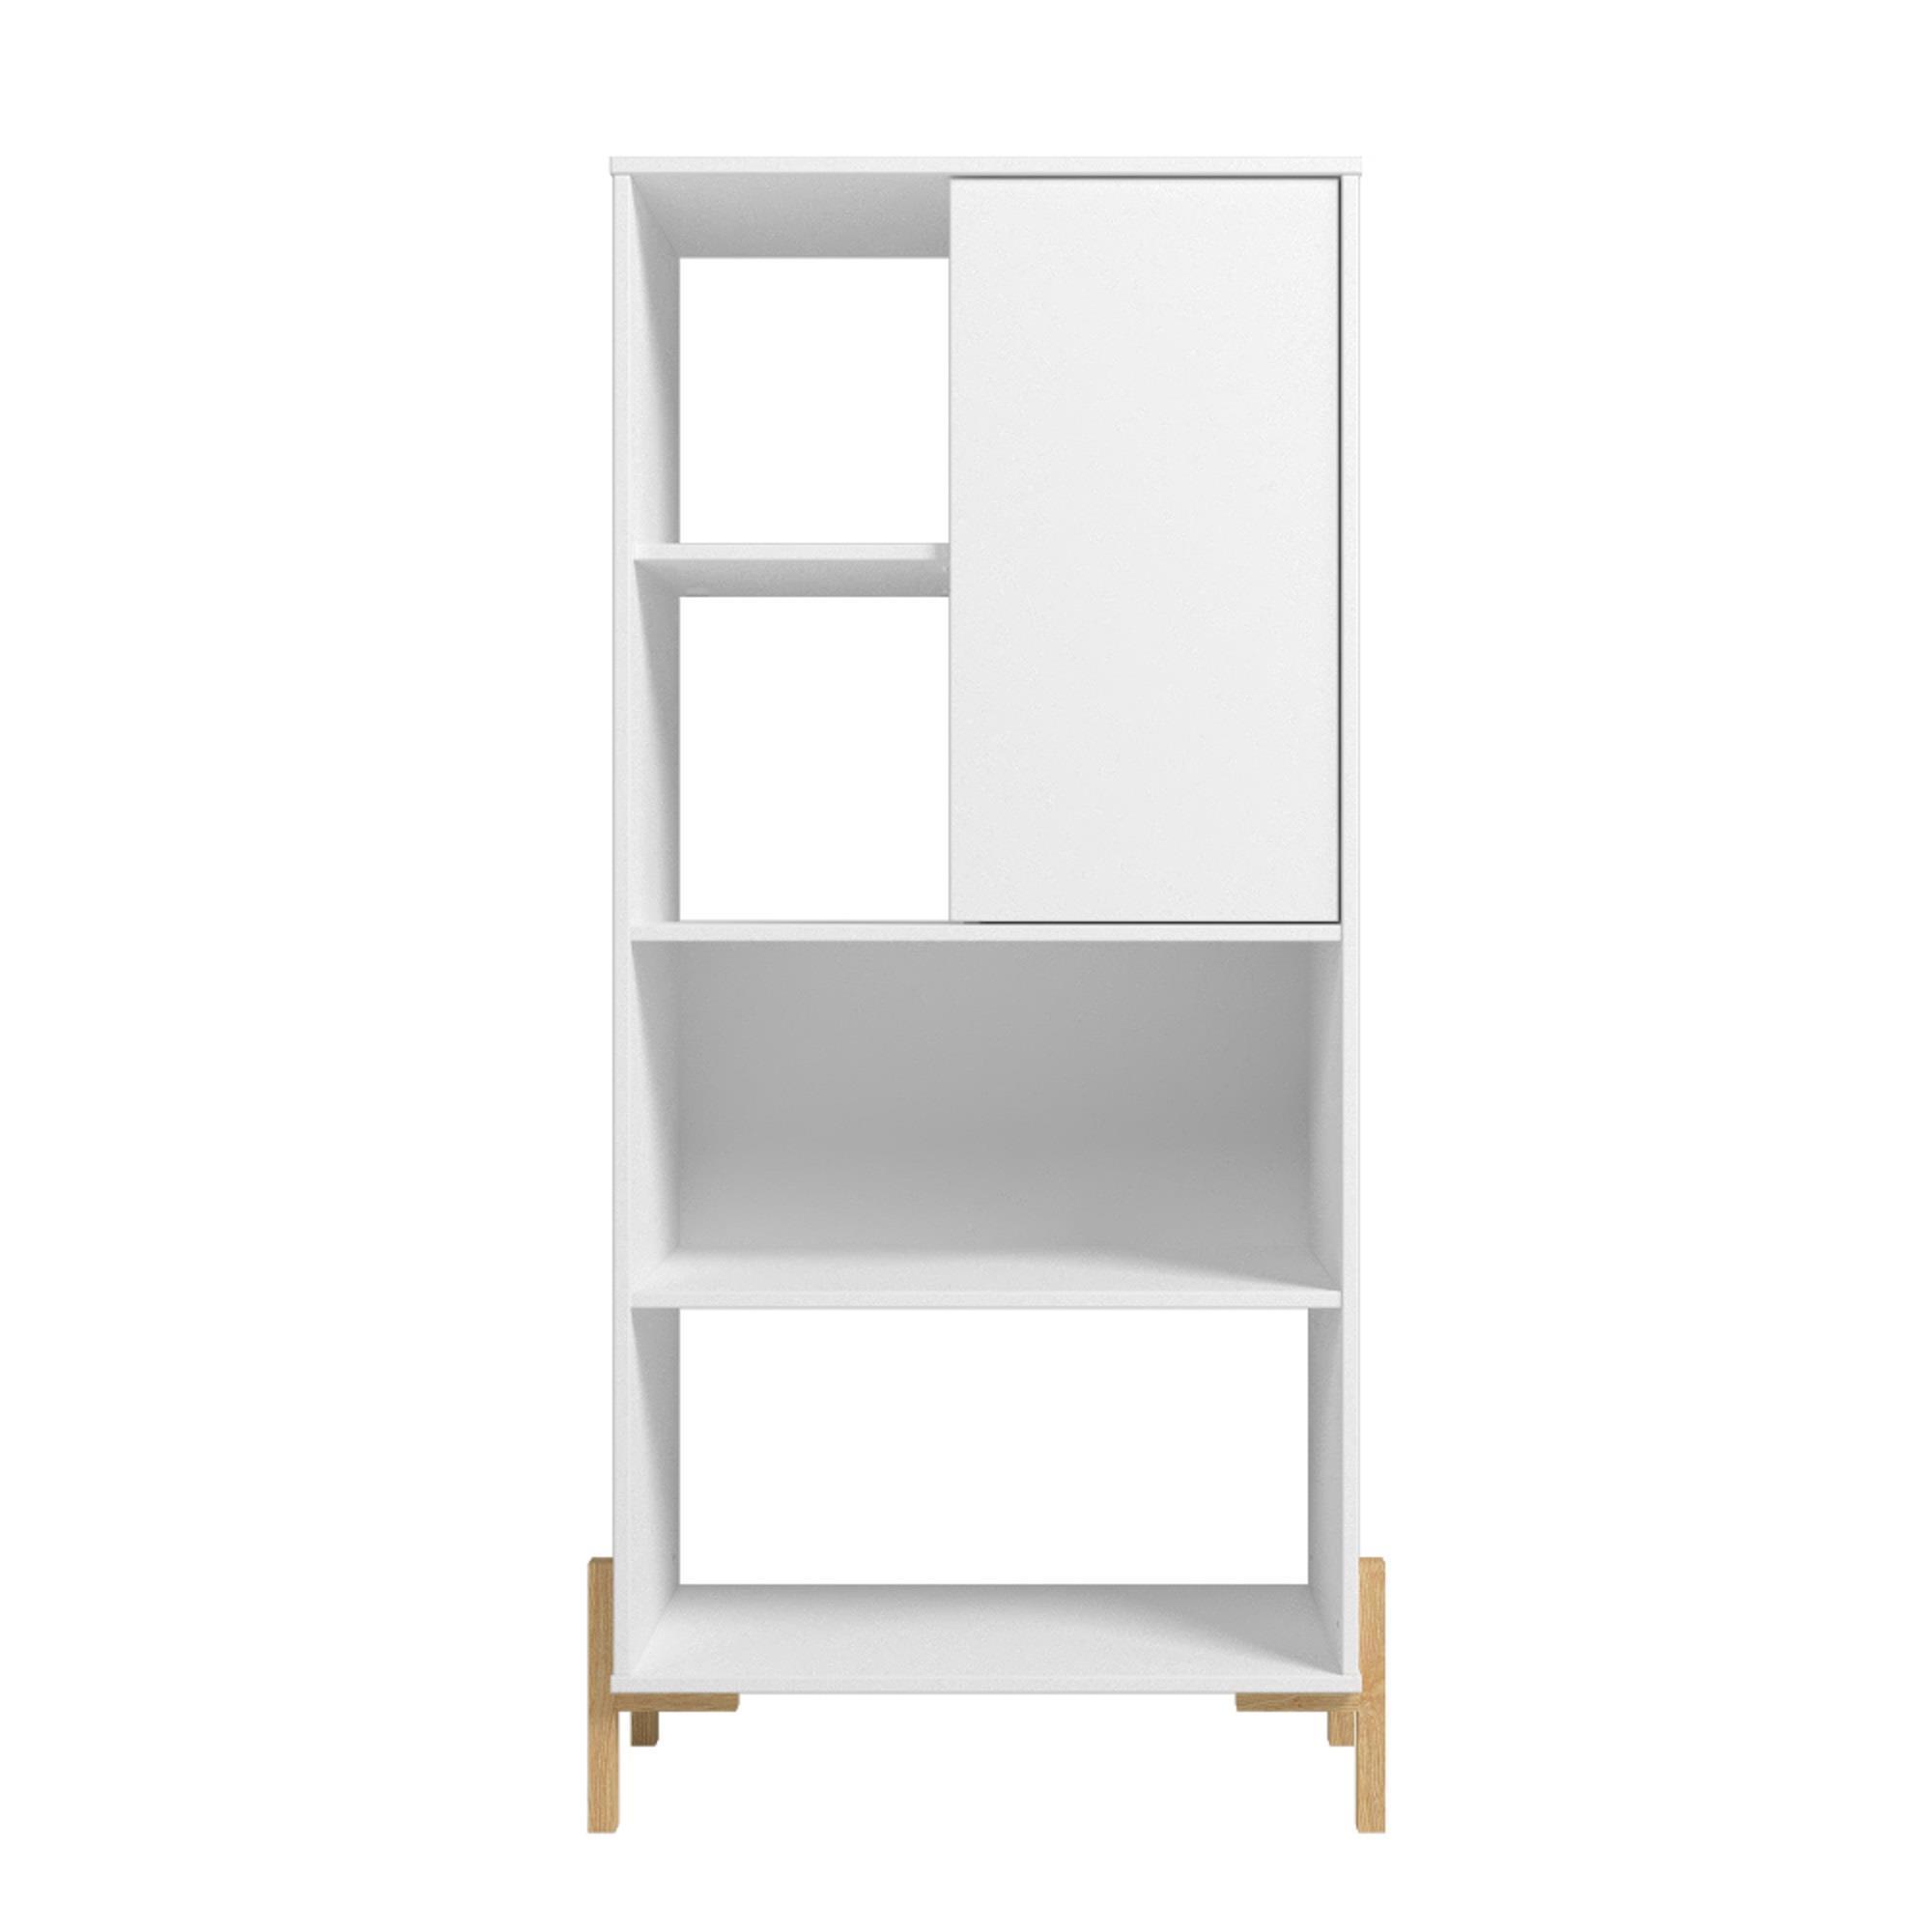 Manhattan Comfort, Bowery Bookcase with 5 Shelves in White and Oak, Height 60.43 in, Shelves (qty.) 5 Material MDPE, Model 308AMC